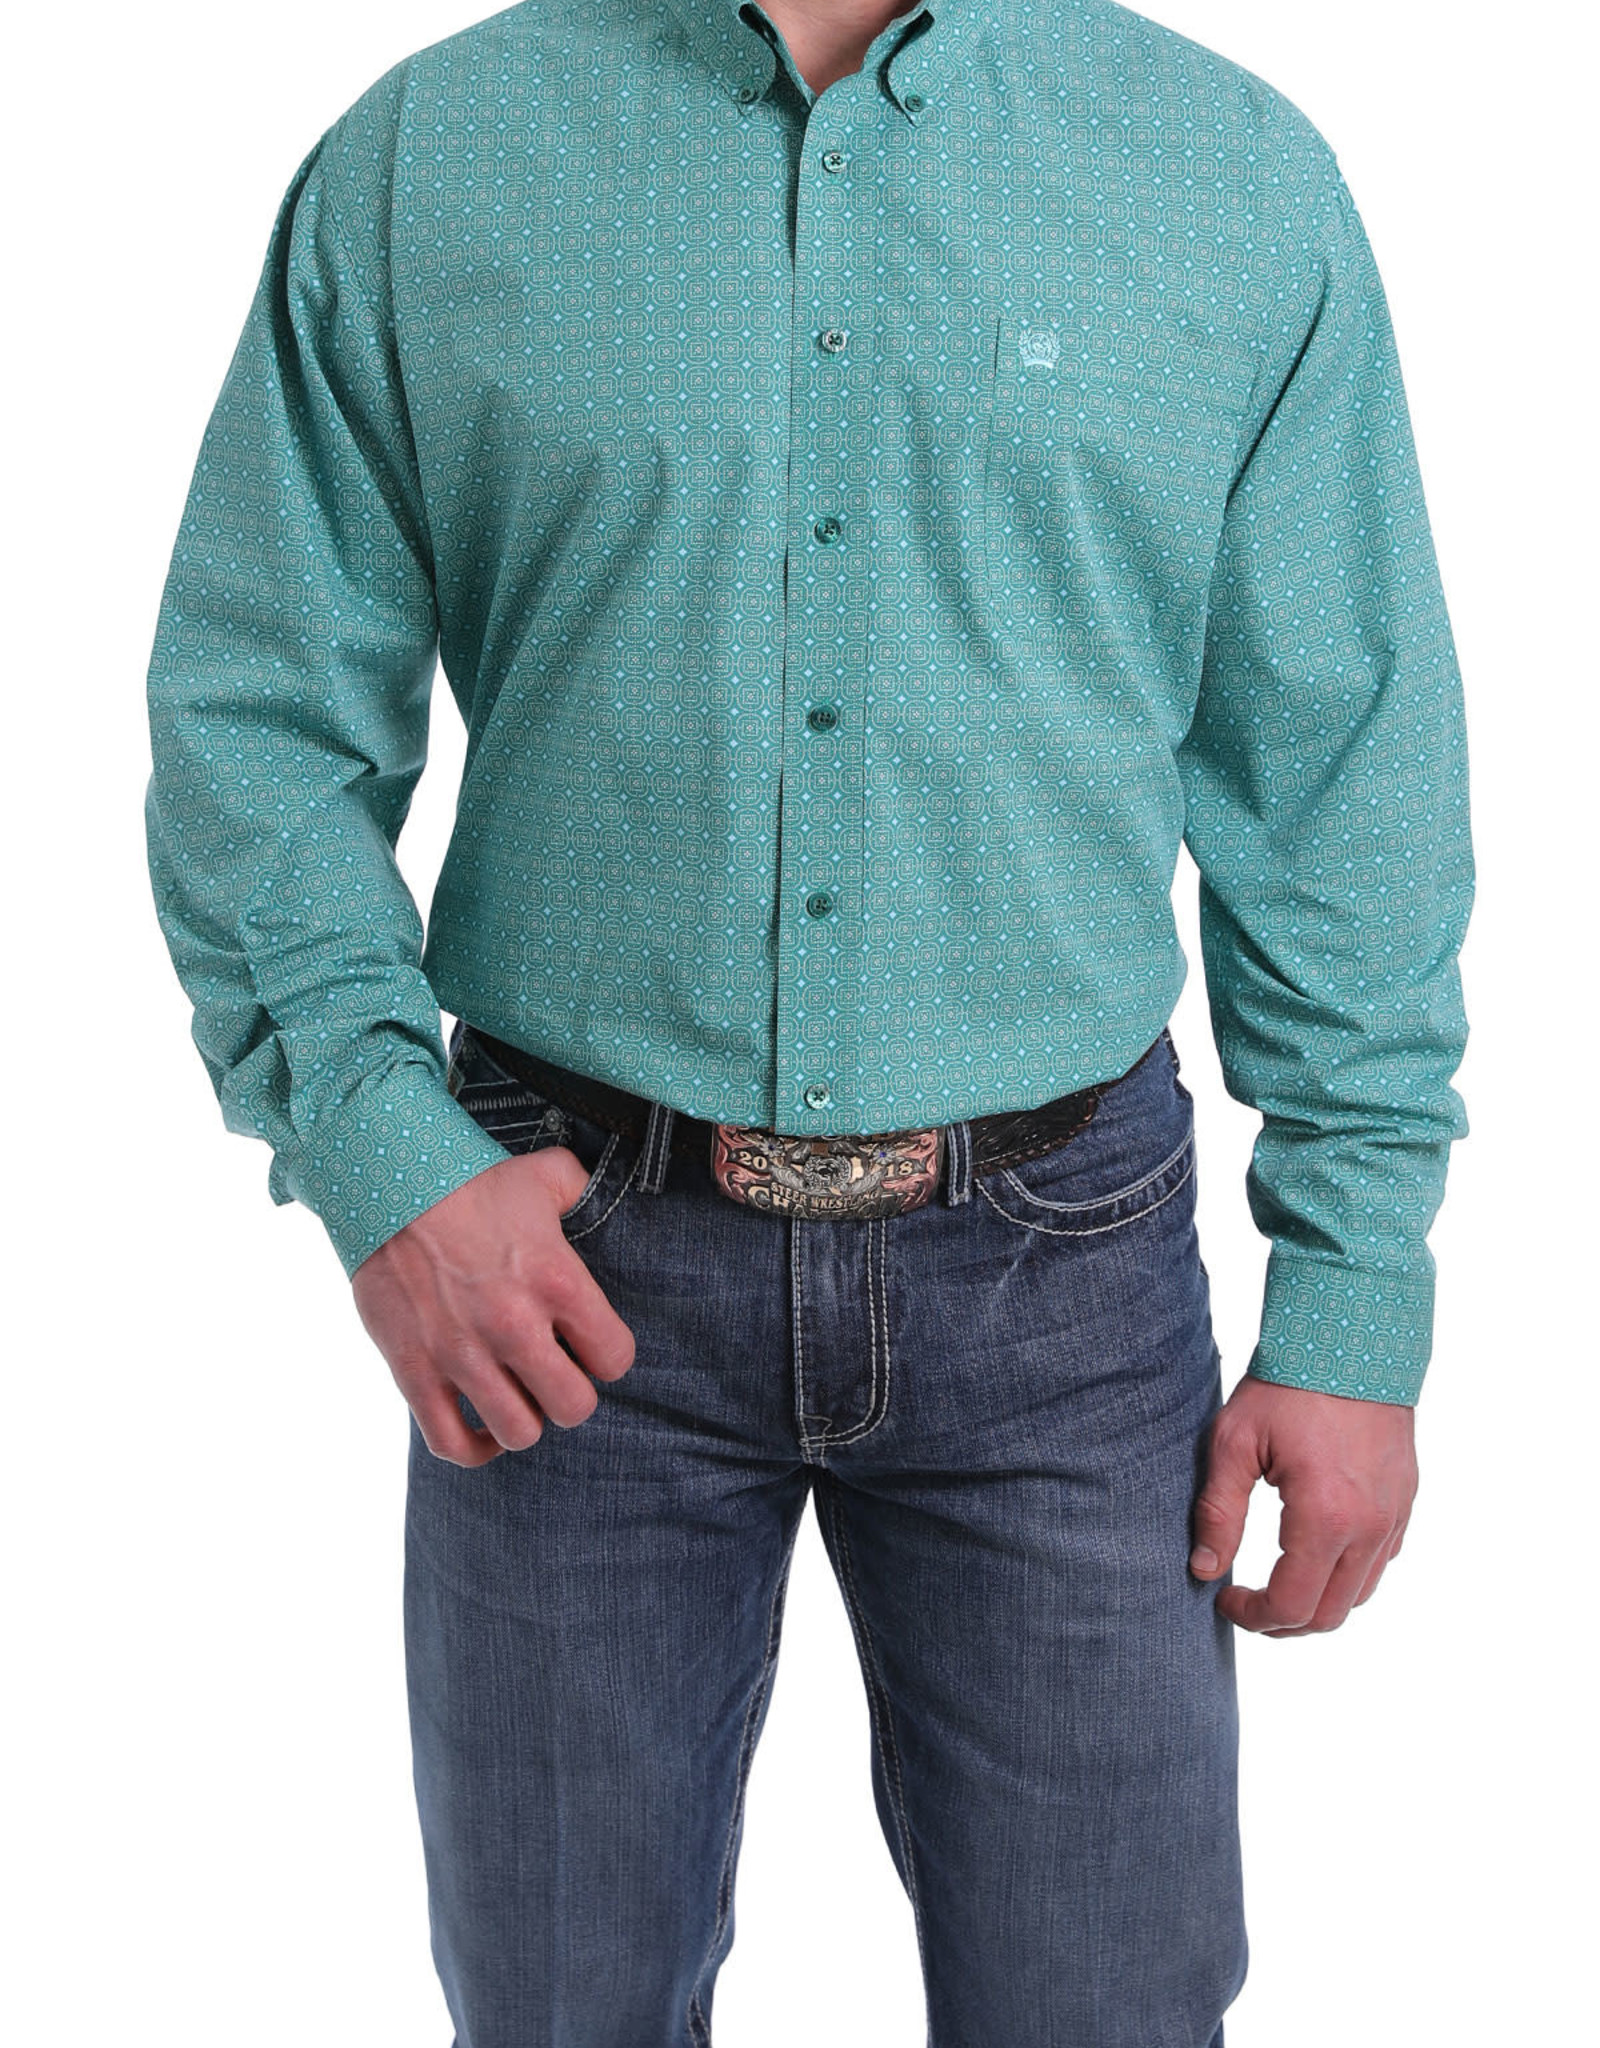 MEN'S GREEN AND TURQUOISE PRINT BUTTON 